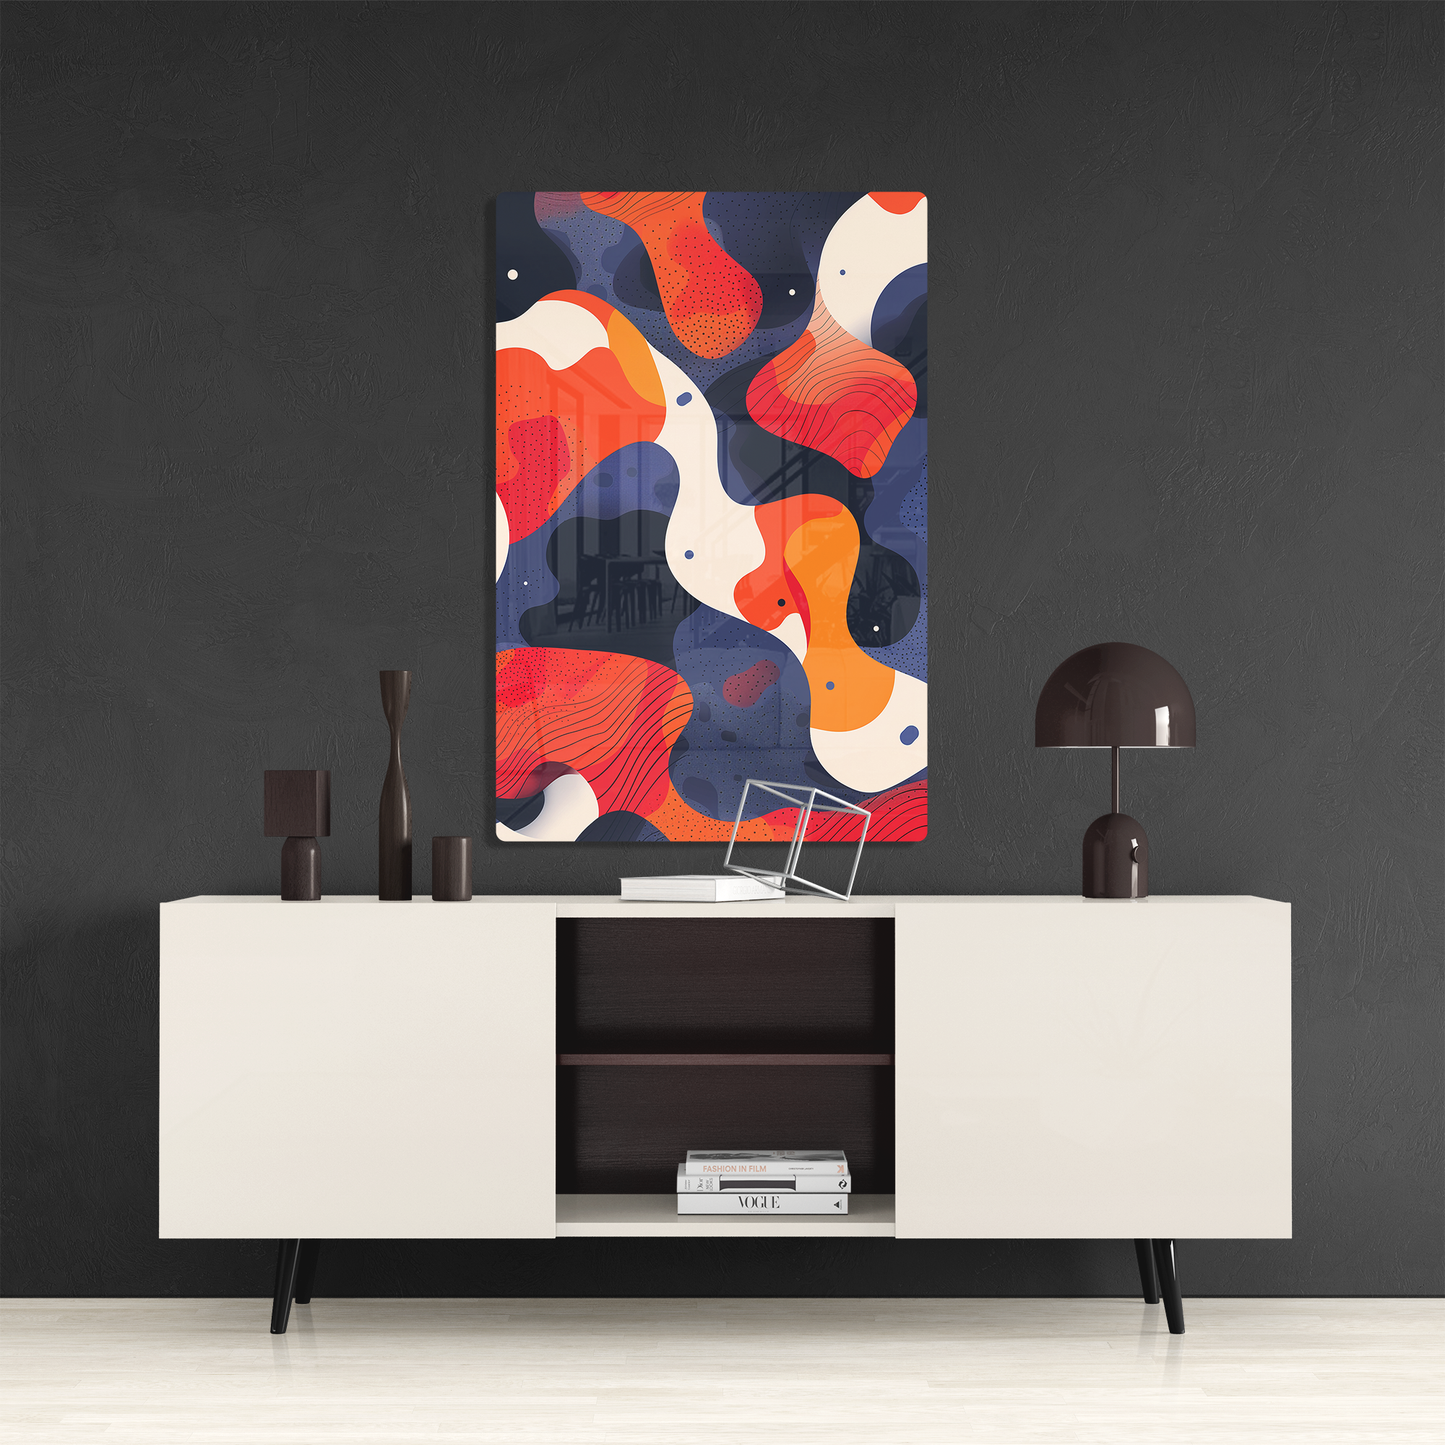 Colorflow Canvas (Acrylic)Step into the universe with abstract, flowing shapes in a bold color palette. Acrylic art from RimaGallery. Experience the cosmos in your home with vibrant, ethicallRimaGallery